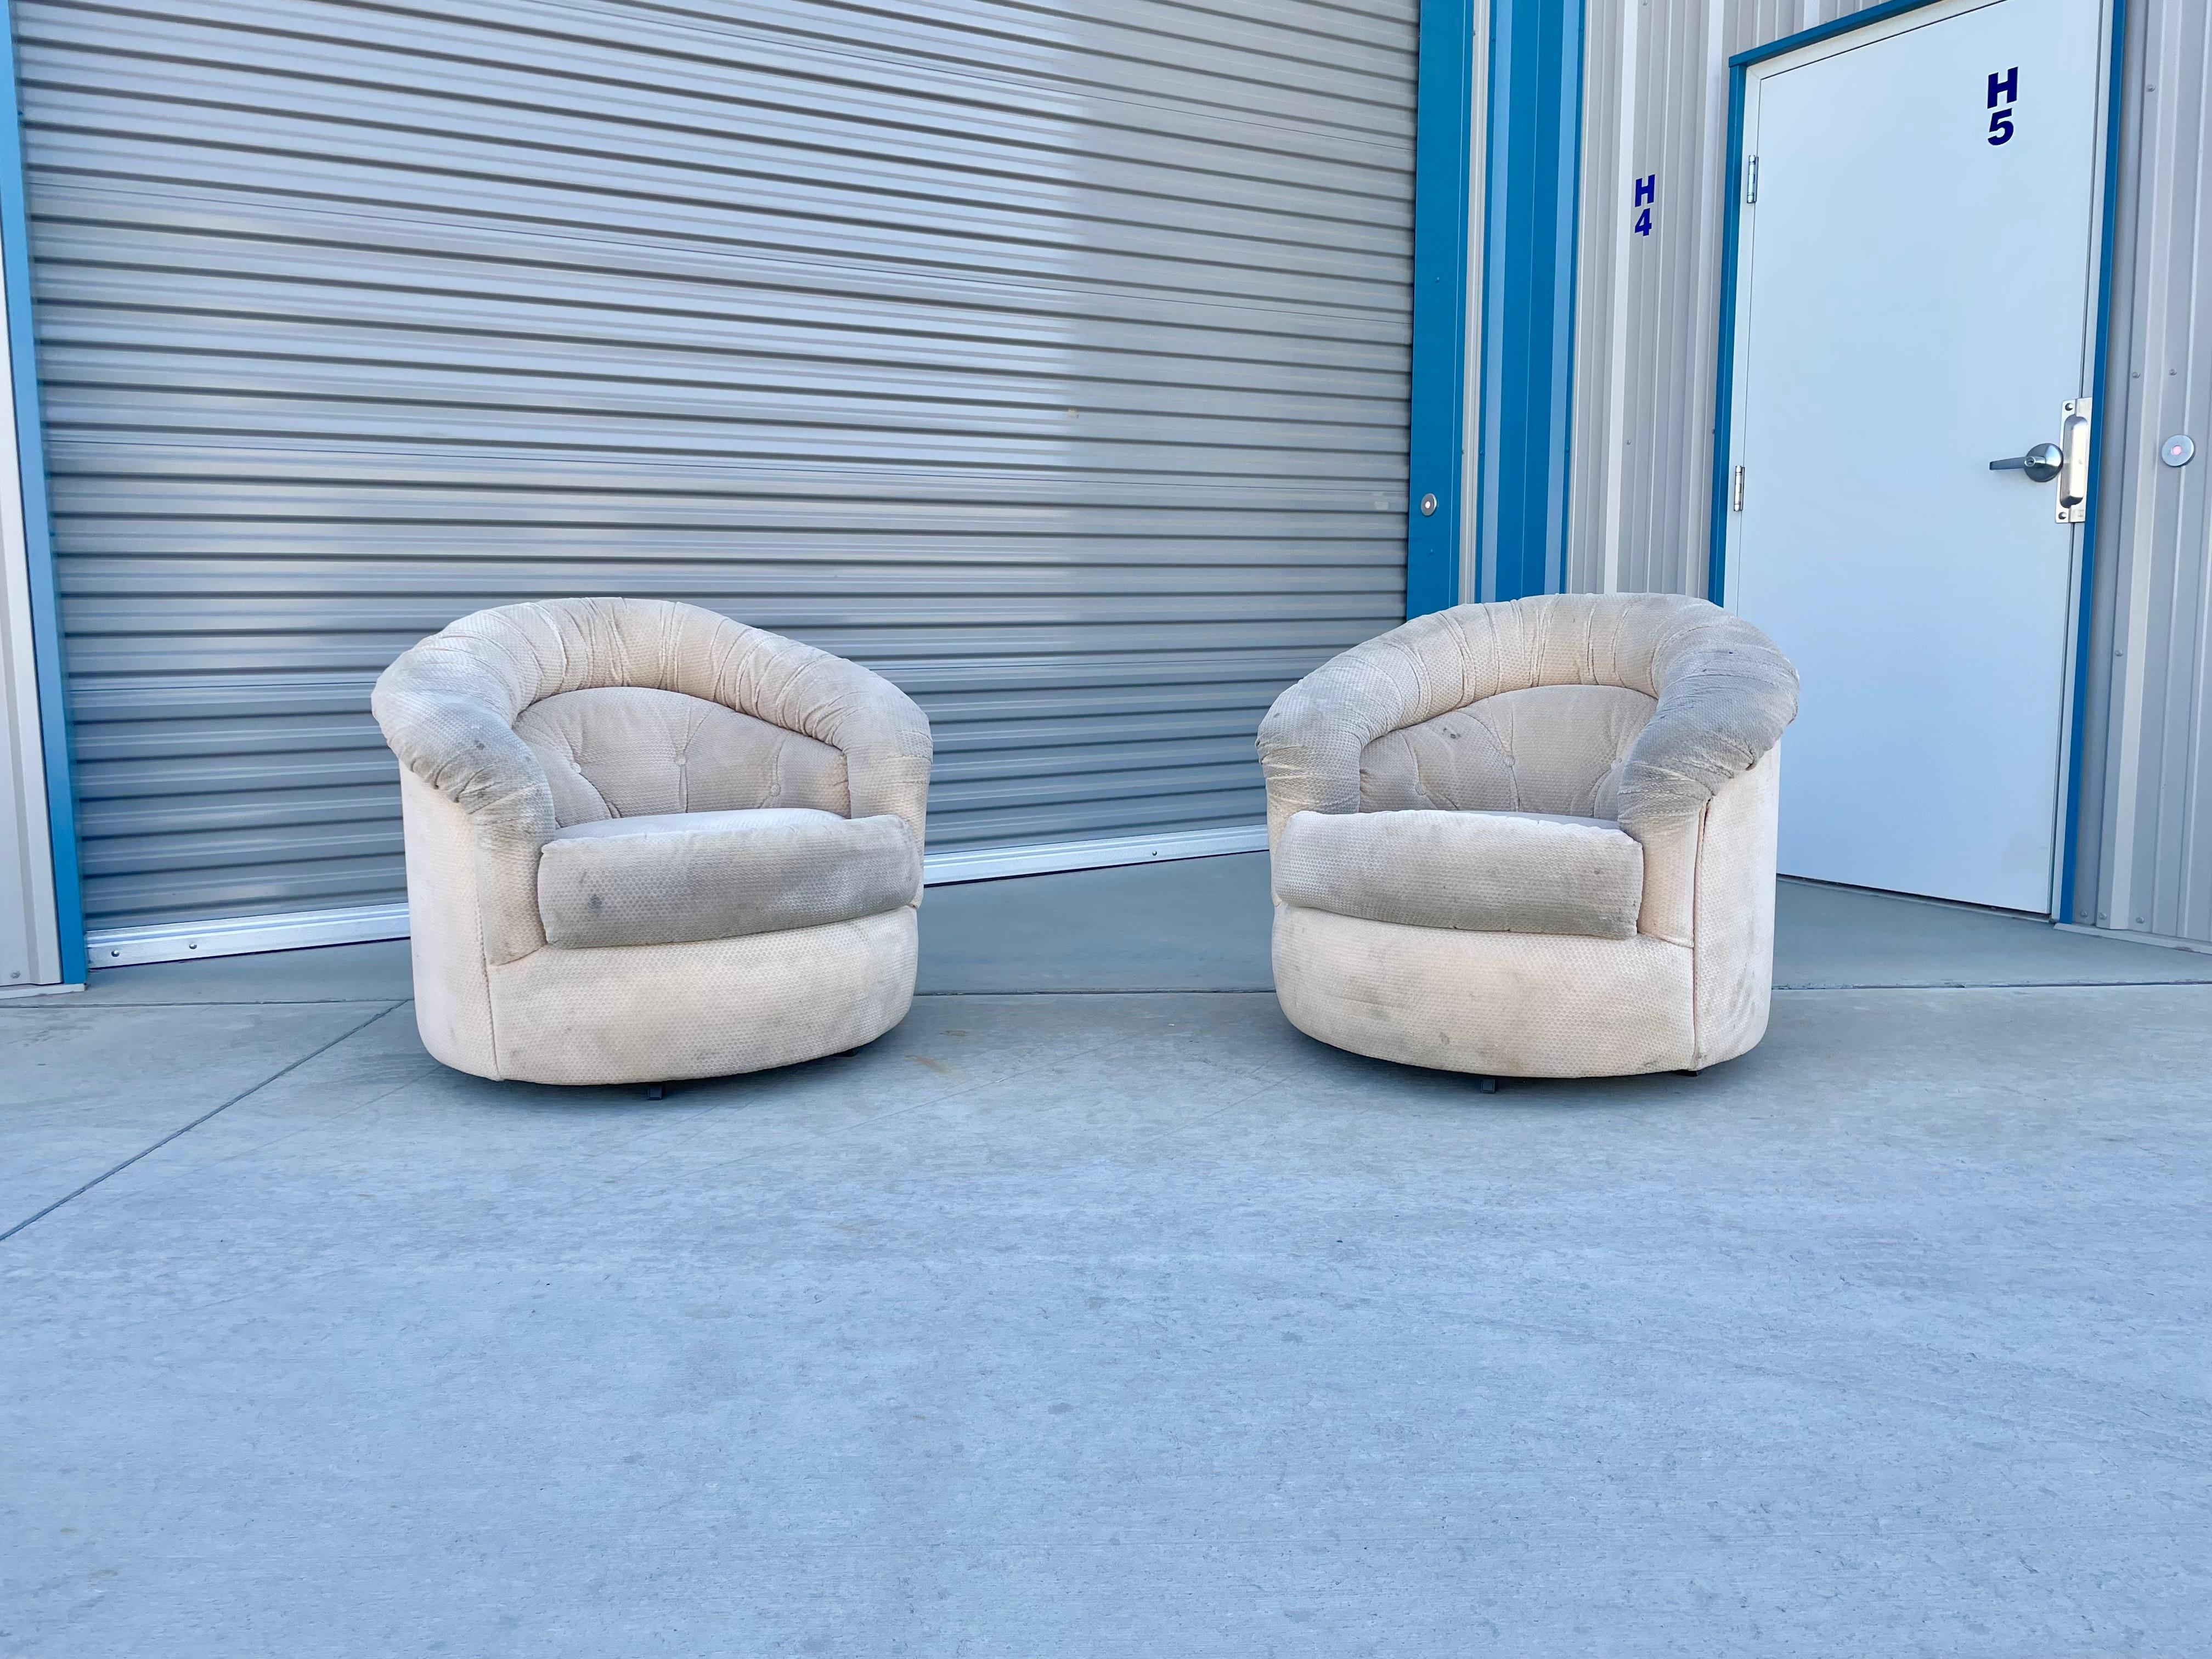 Fantastic vintage pair of barrel chairs styled after Milo Baughman was designed and manufactured in the United States circa 1970s. These beautiful chairs feature a swivel base that rotates 360 degrees. These swivel chairs are guaranteed to draw